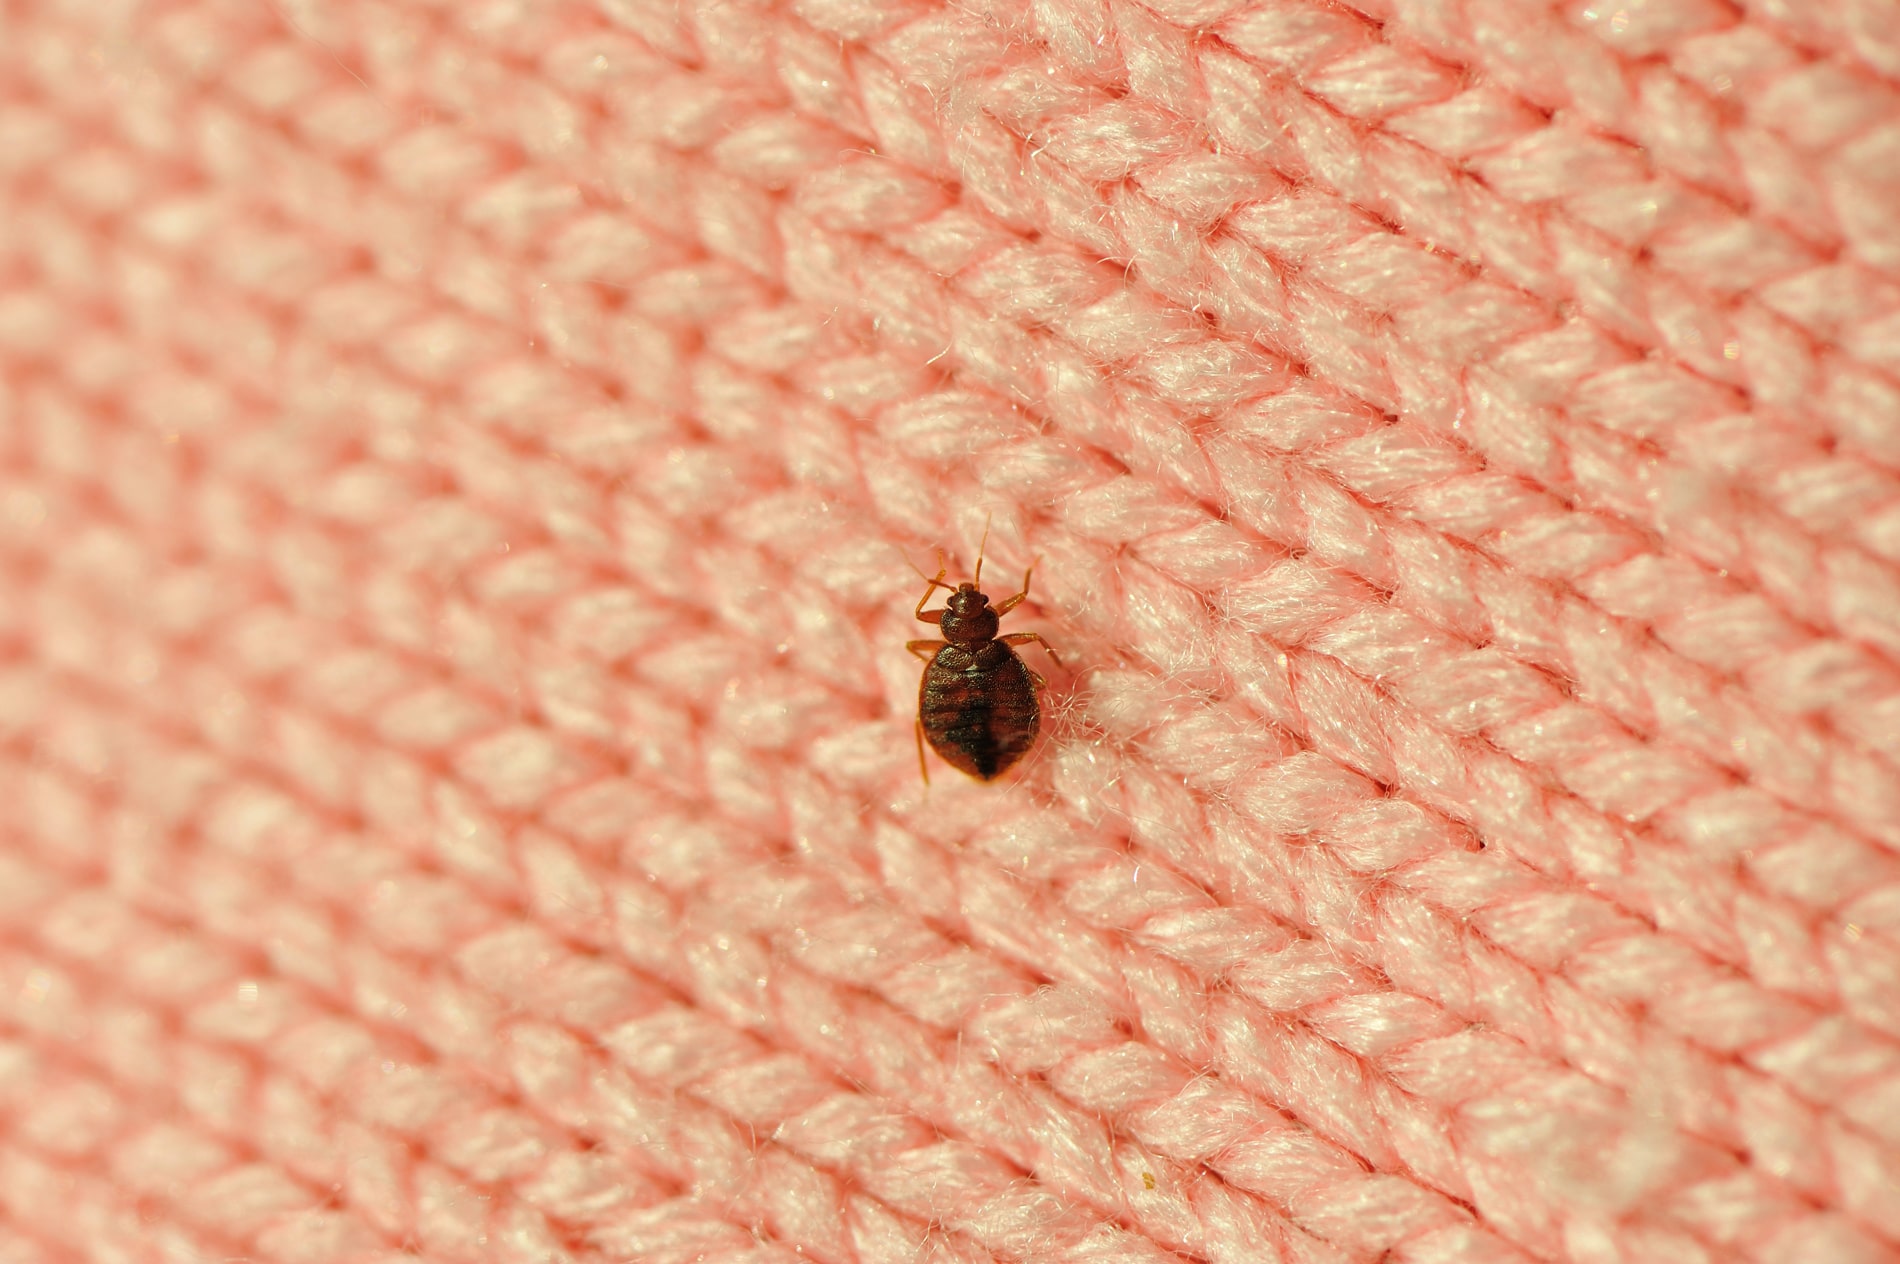 What Should You Do If You Find Bed Bugs